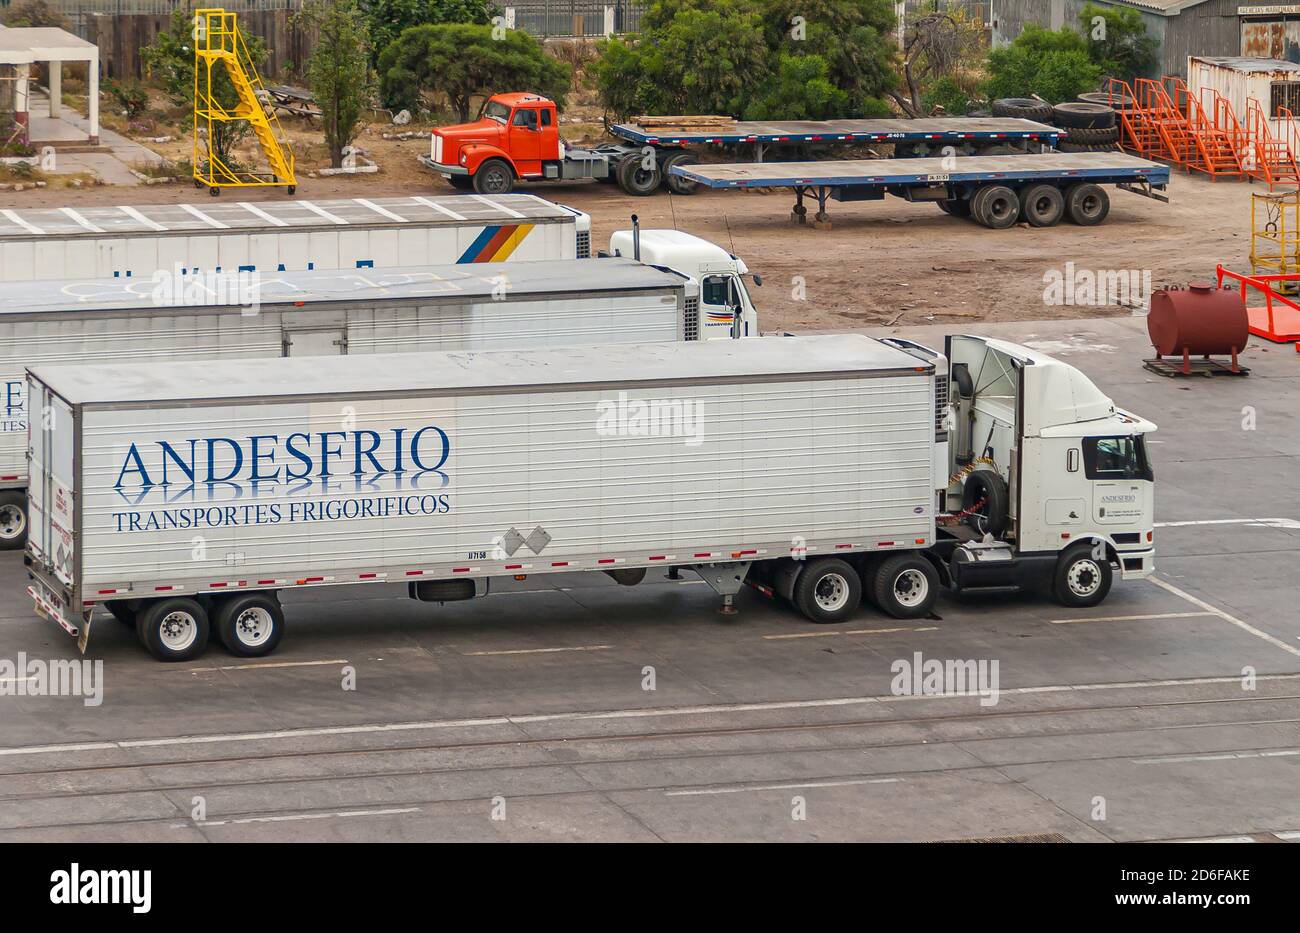 Coquimbo, Chile - December 7, 2008: White refrigerator truck of Andesfrio company parked in port. Other trucks and trailers present. Stock Photo